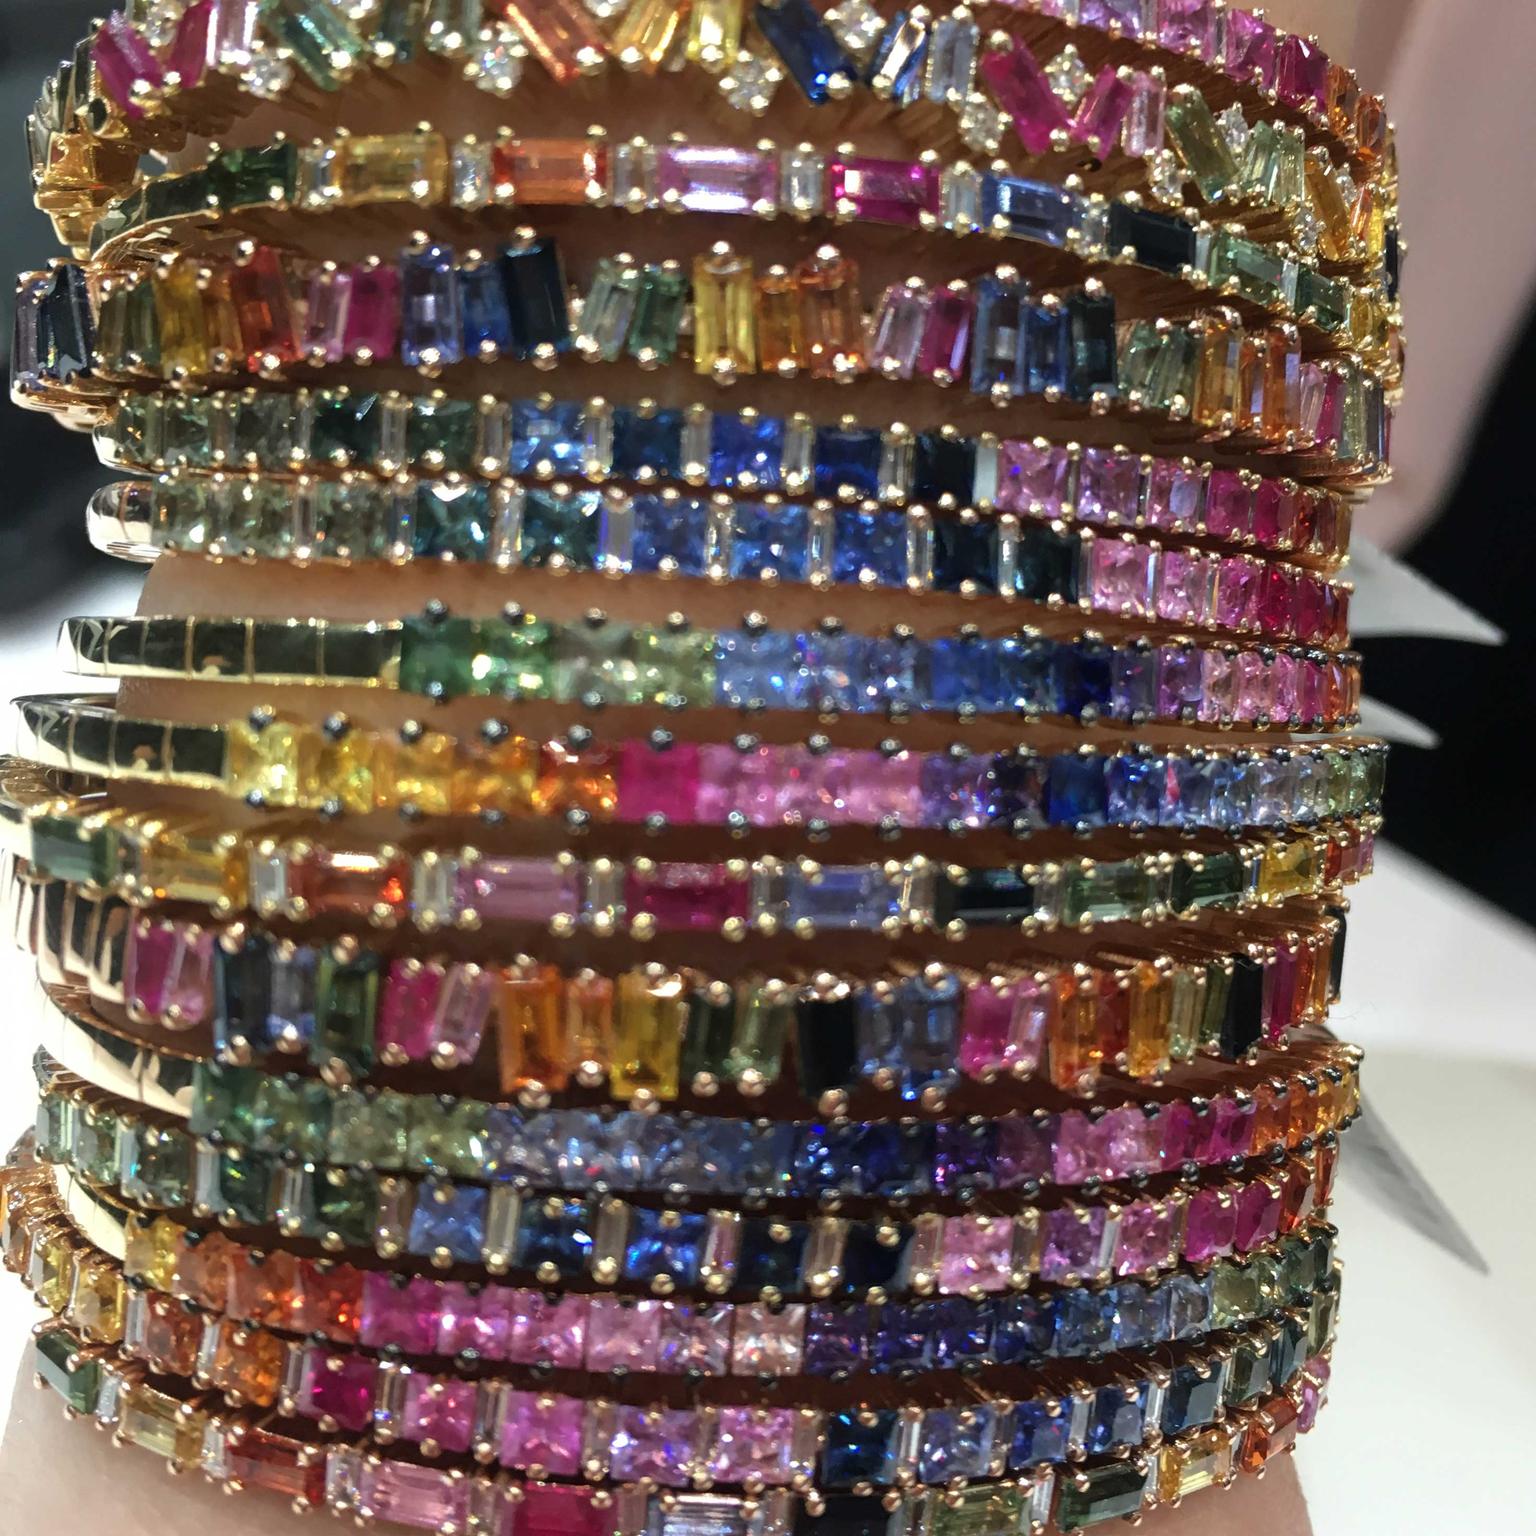 Independent jewellers also have their place at the Doha Jewellery and Watch Exhibition such as Los Angeles based Suzanne Kalan who upped the colour factor with her Rainbow Fireworks bangles seen at DJWE